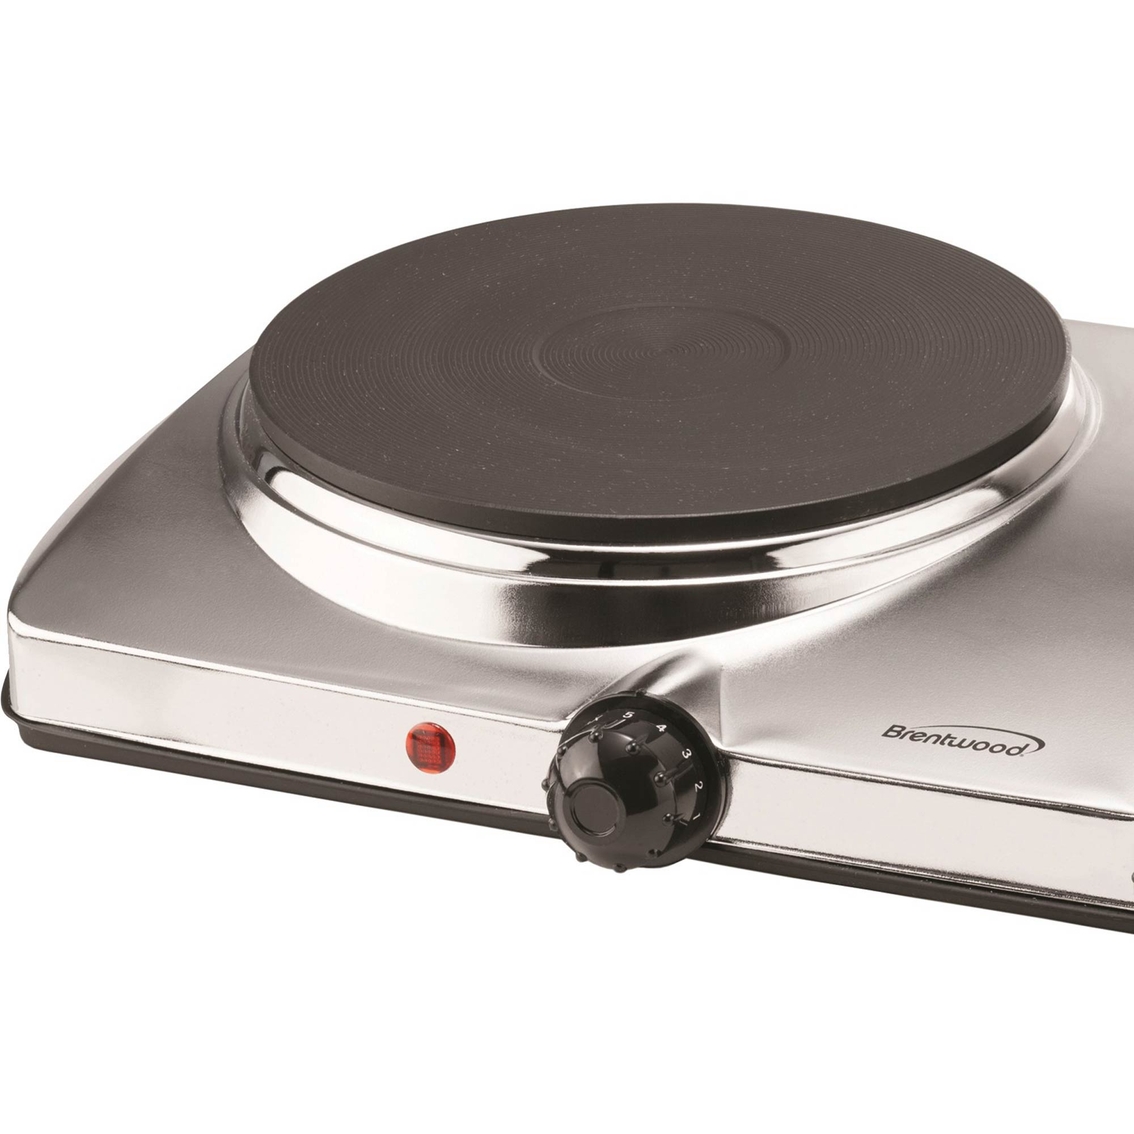 Brentwood 1440 Watt Double-Burner Electric Hot Plate - Image 2 of 5